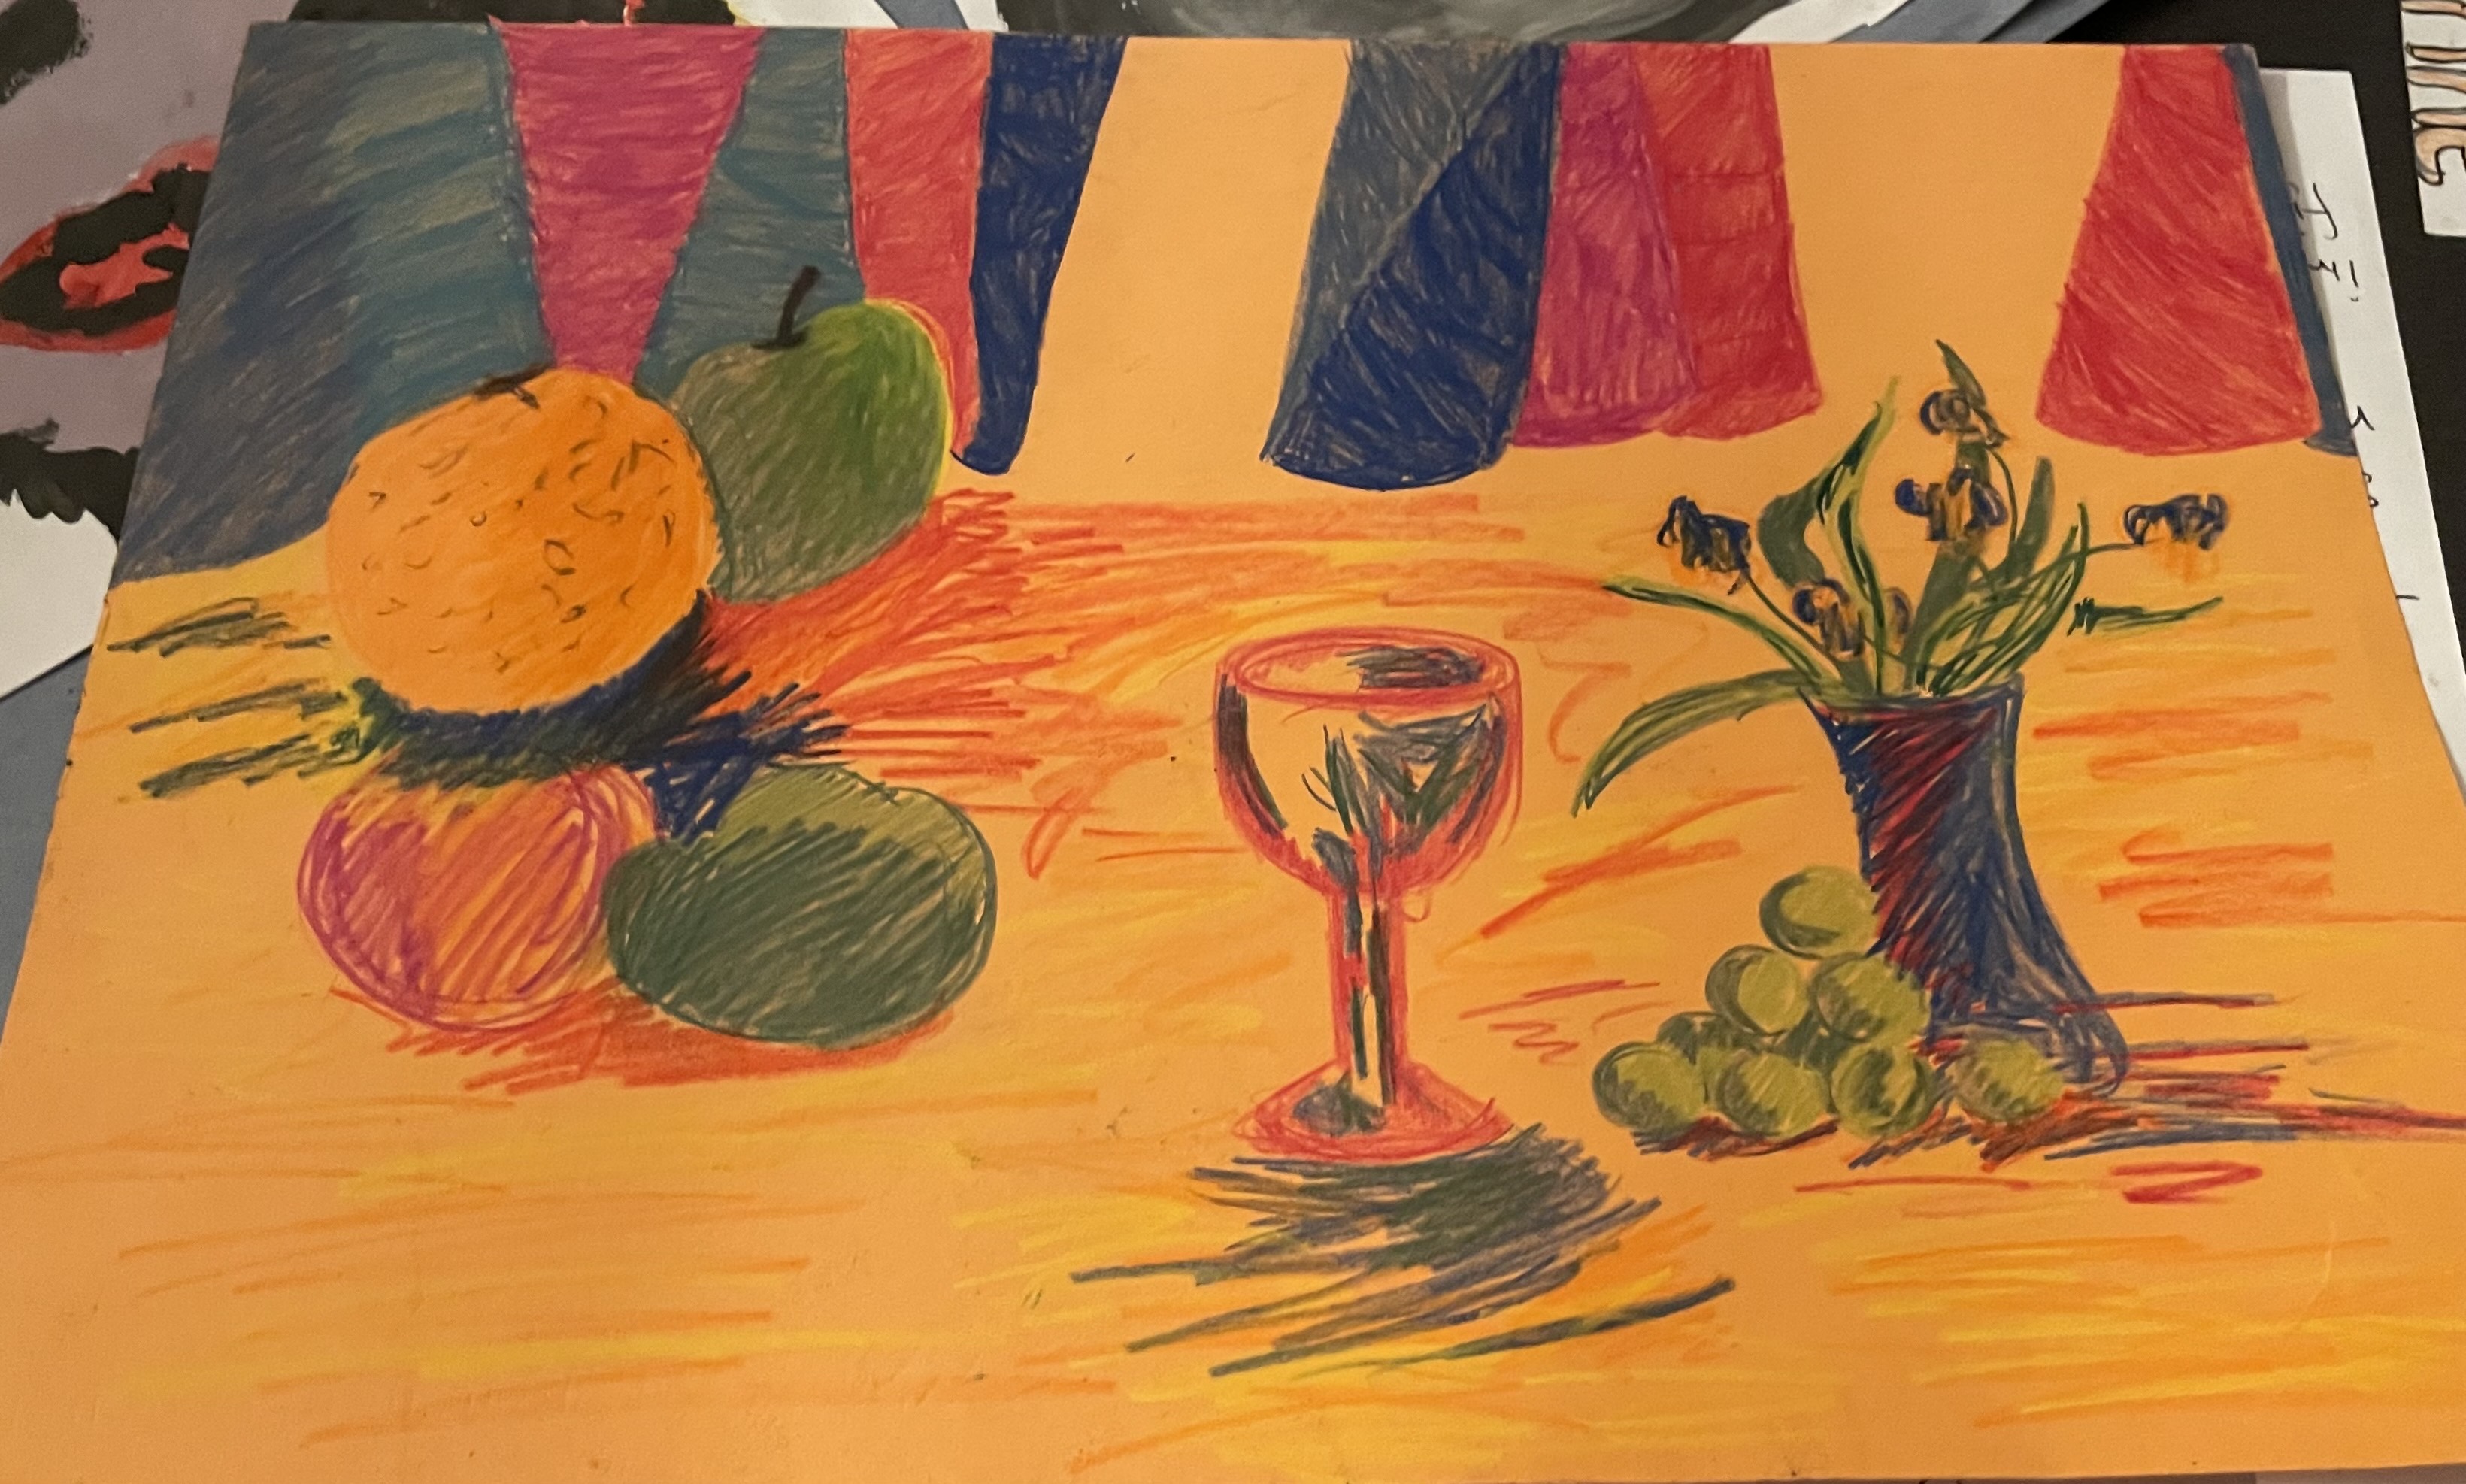 My still life drawing with colored pencils by korkmazart on DeviantArt